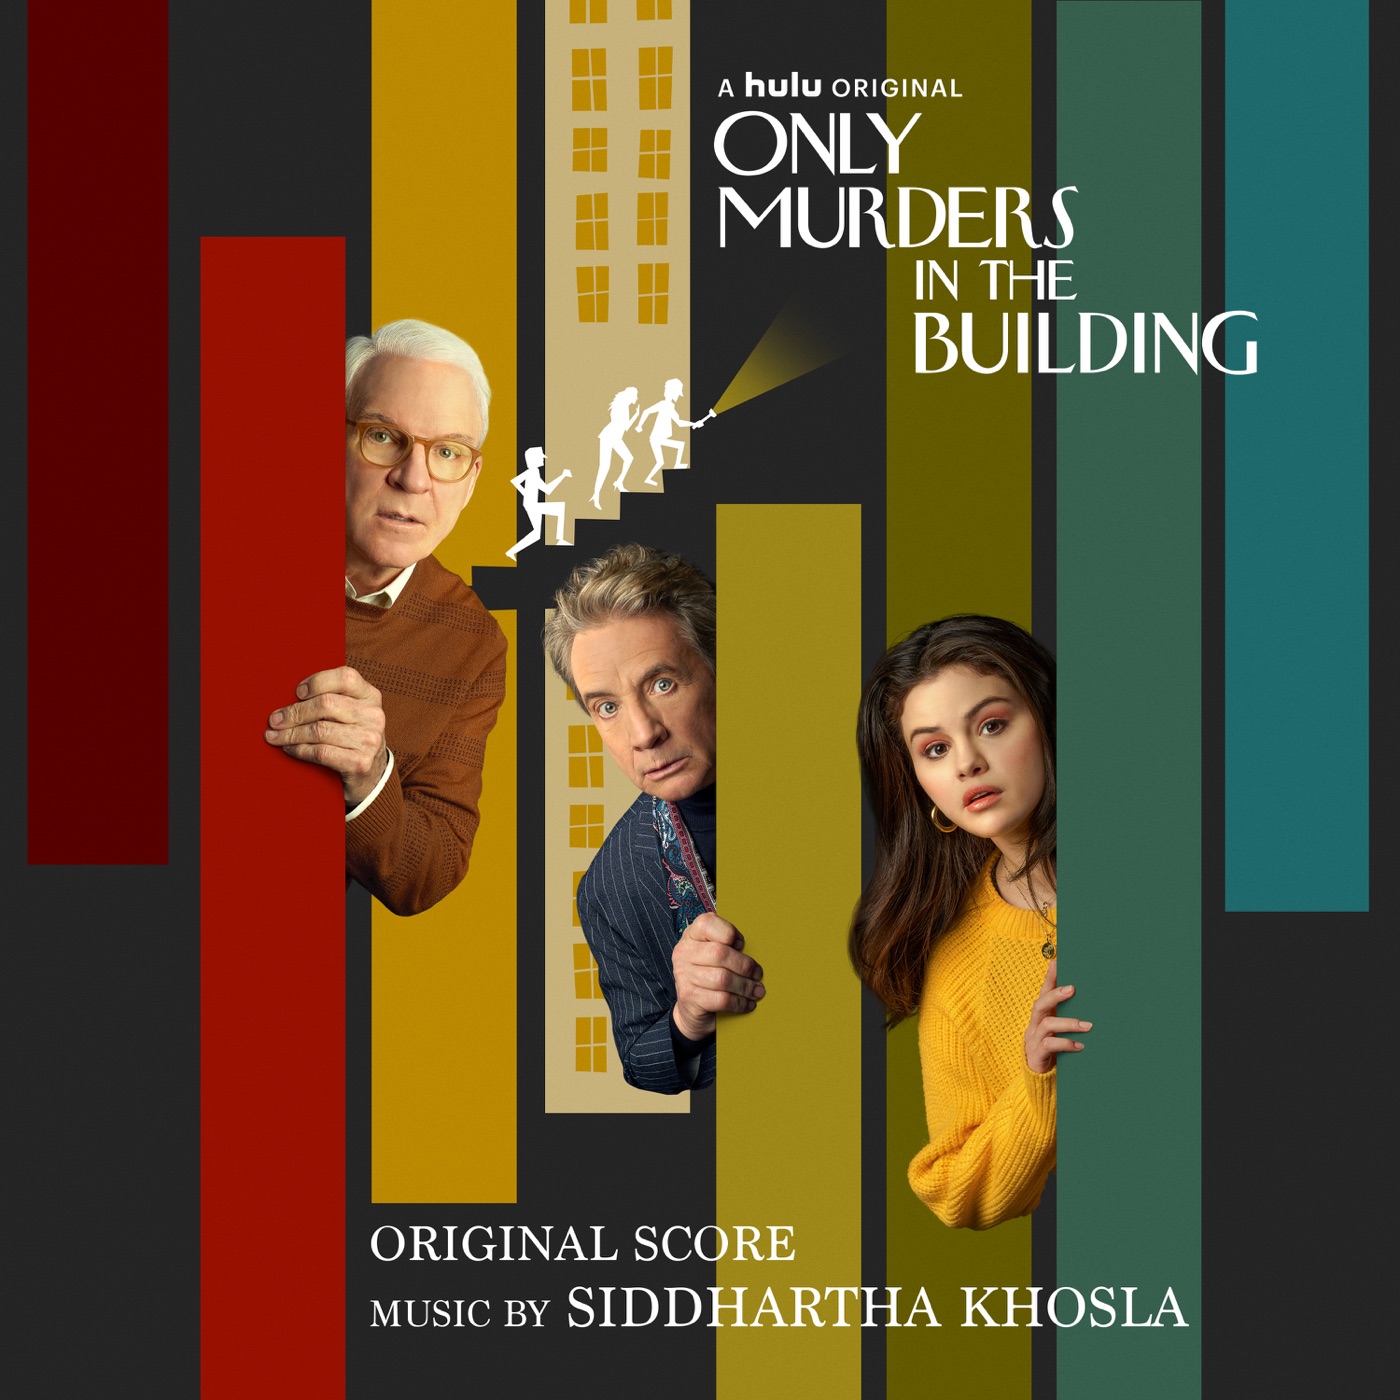 Only Murders in the Building (Original Score) by Siddhartha Khosla